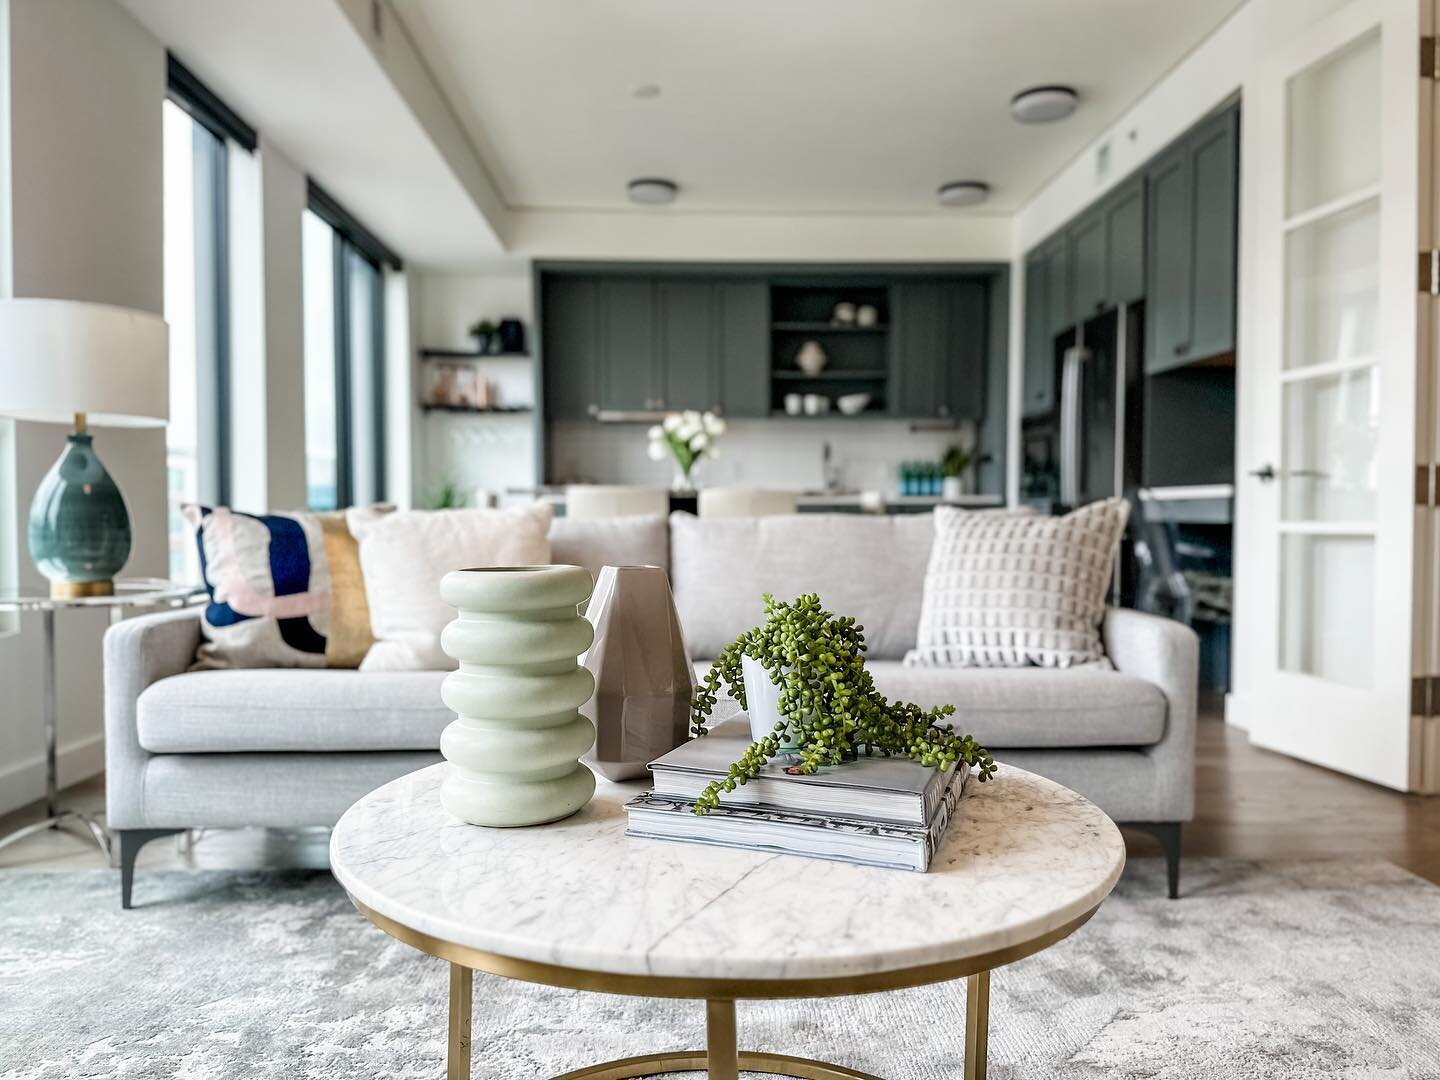 Thrilled for the opportunity to make this unit shine at the Coloradan 🤩

Our new fur chair making its debut and we are totally smitten 
#florainteriors #denverstaging